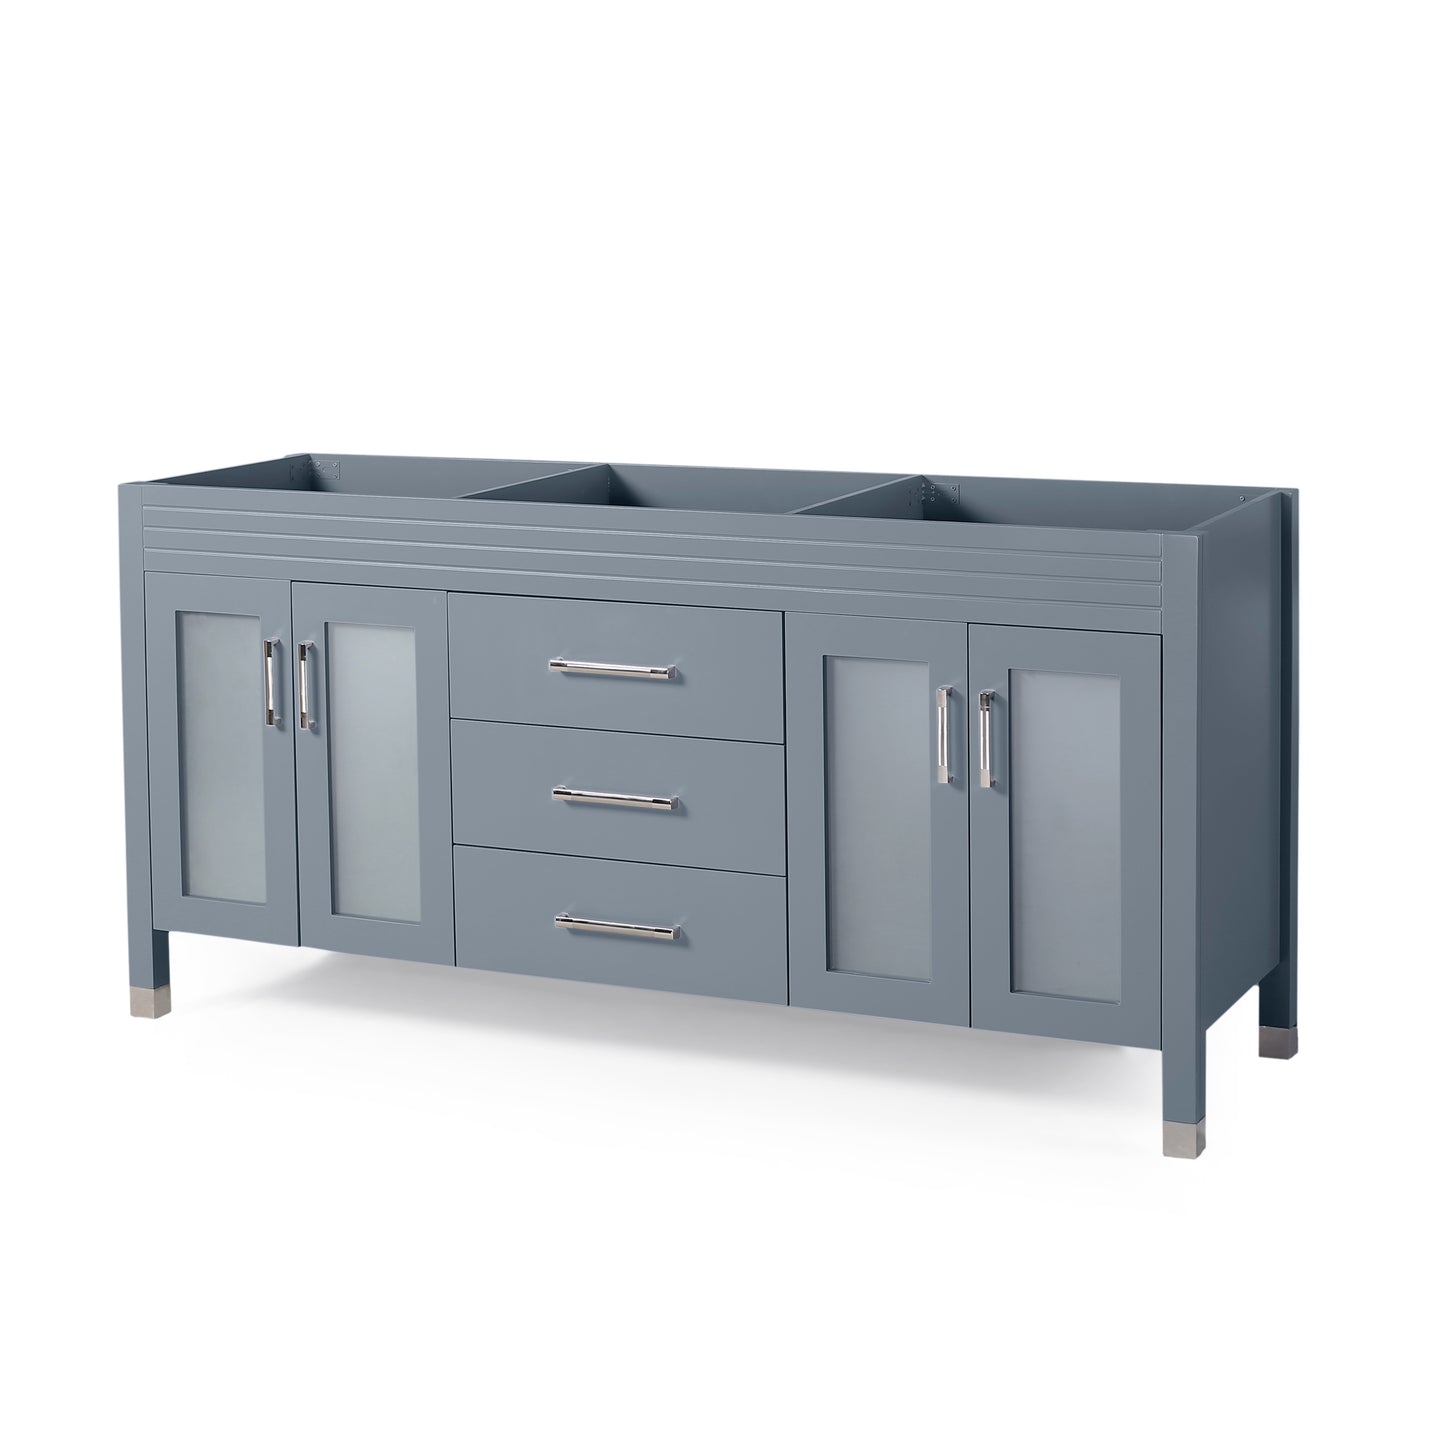 Holdame Contemporary 72" Wood Bathroom Vanity (Counter Top Not Included)